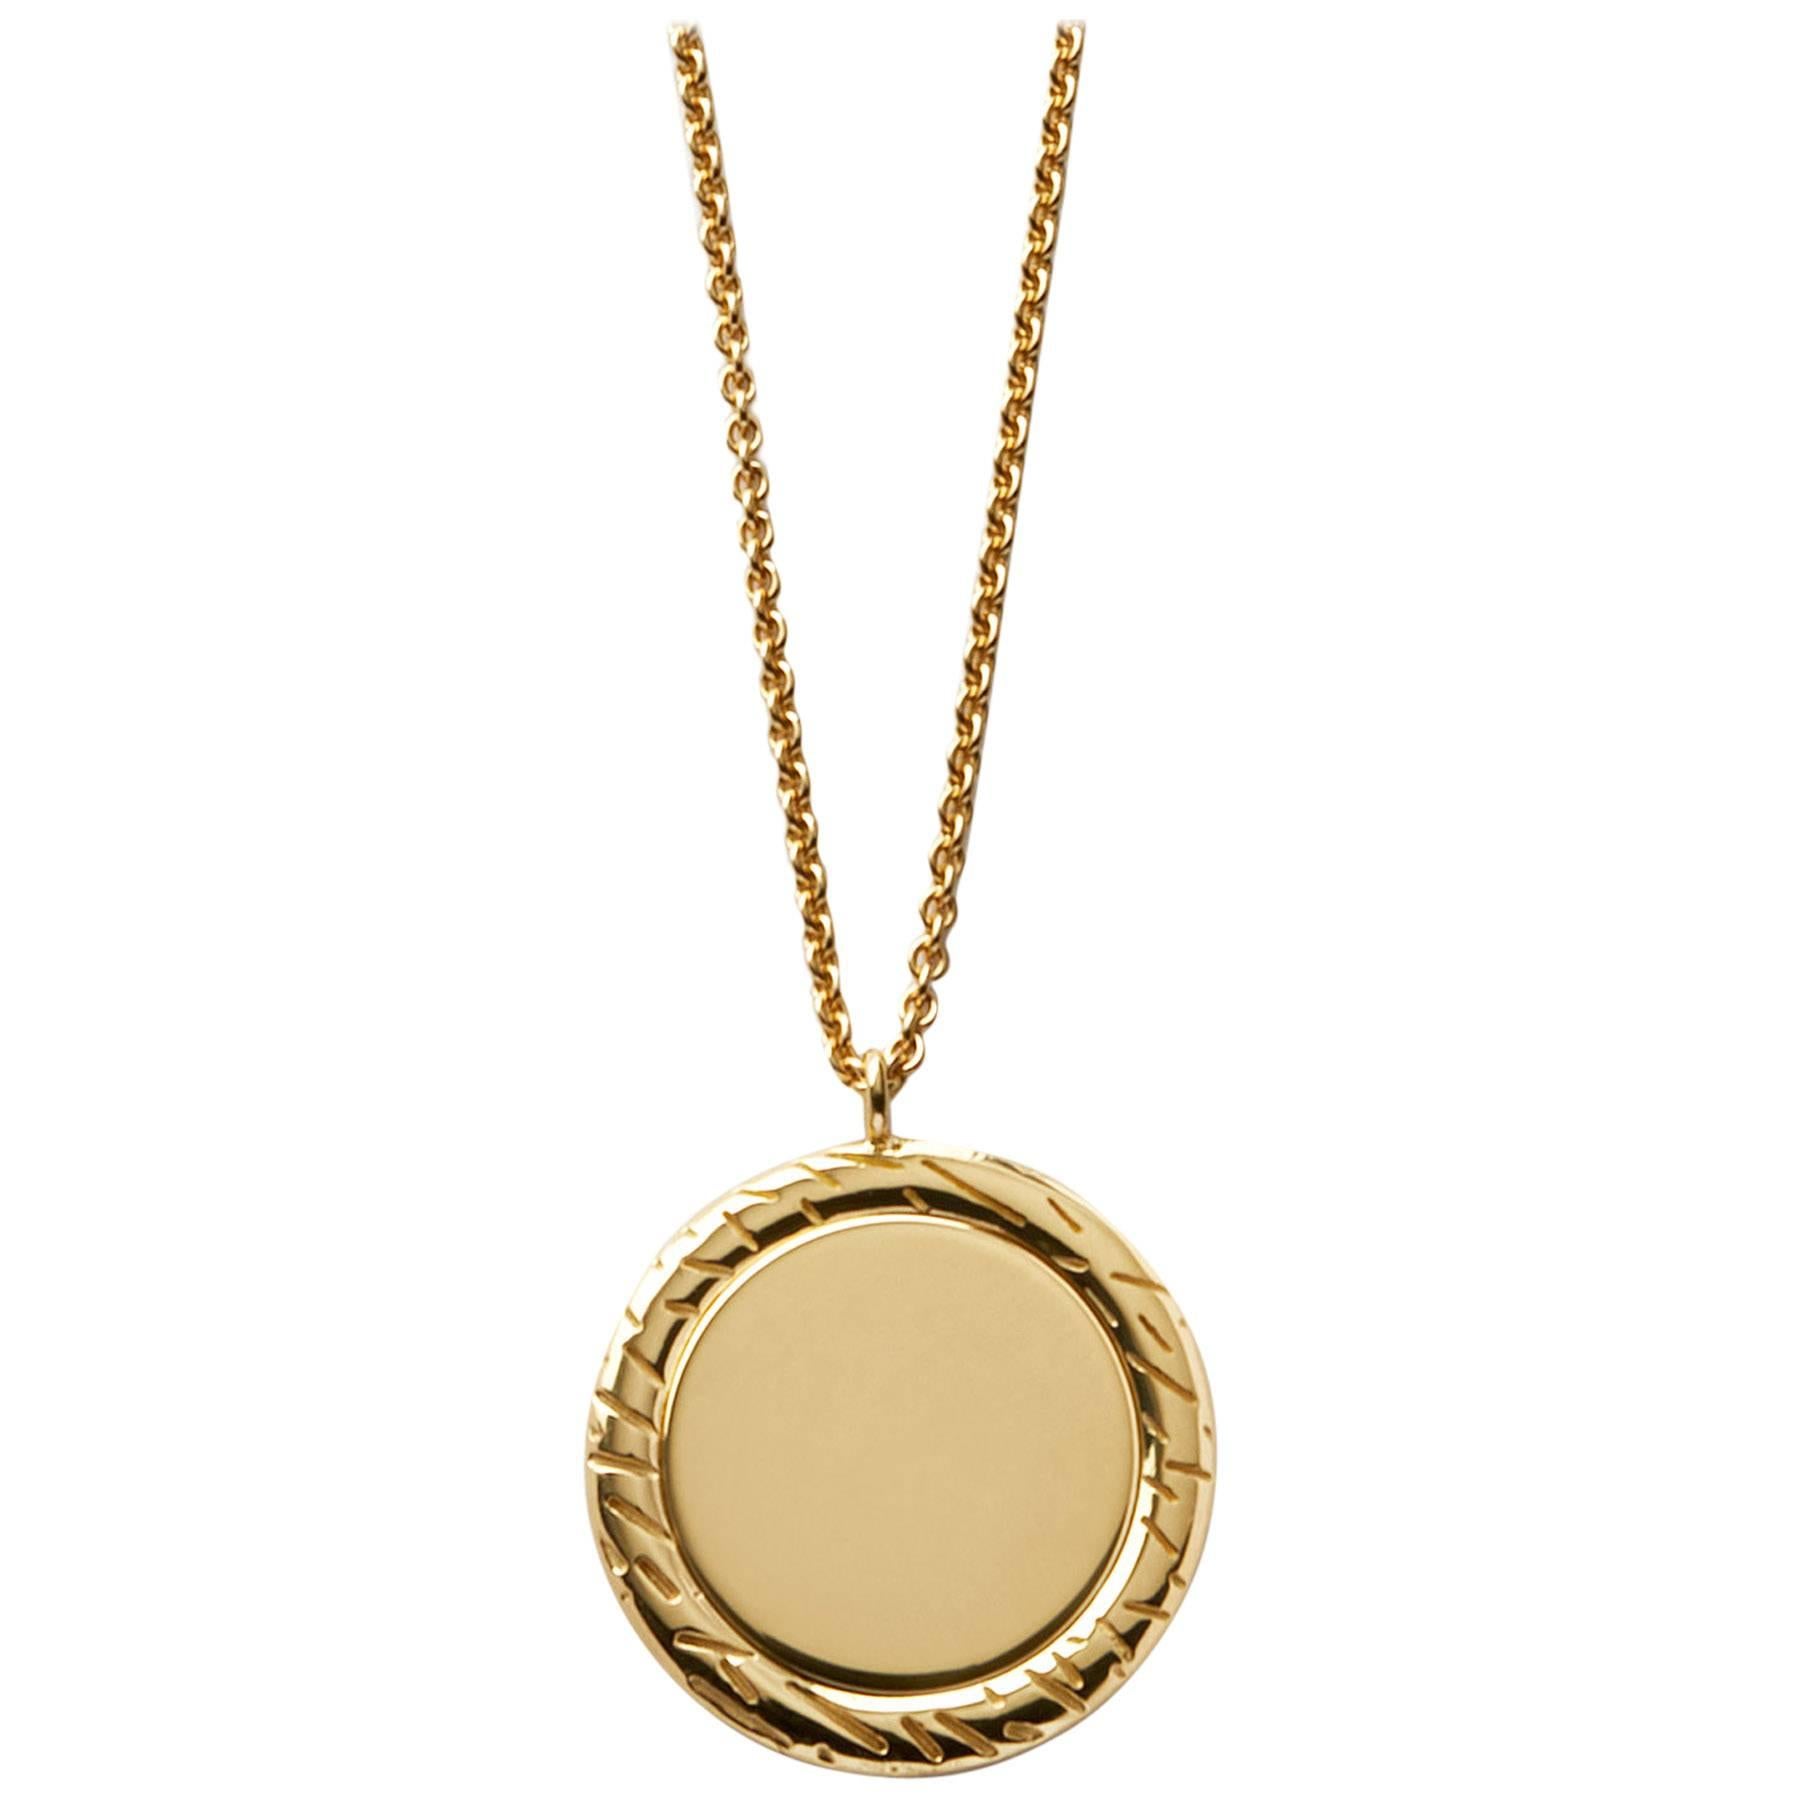 Gold Closed Circle Fur Pendant Necklace by Bear Brooksbank For Sale